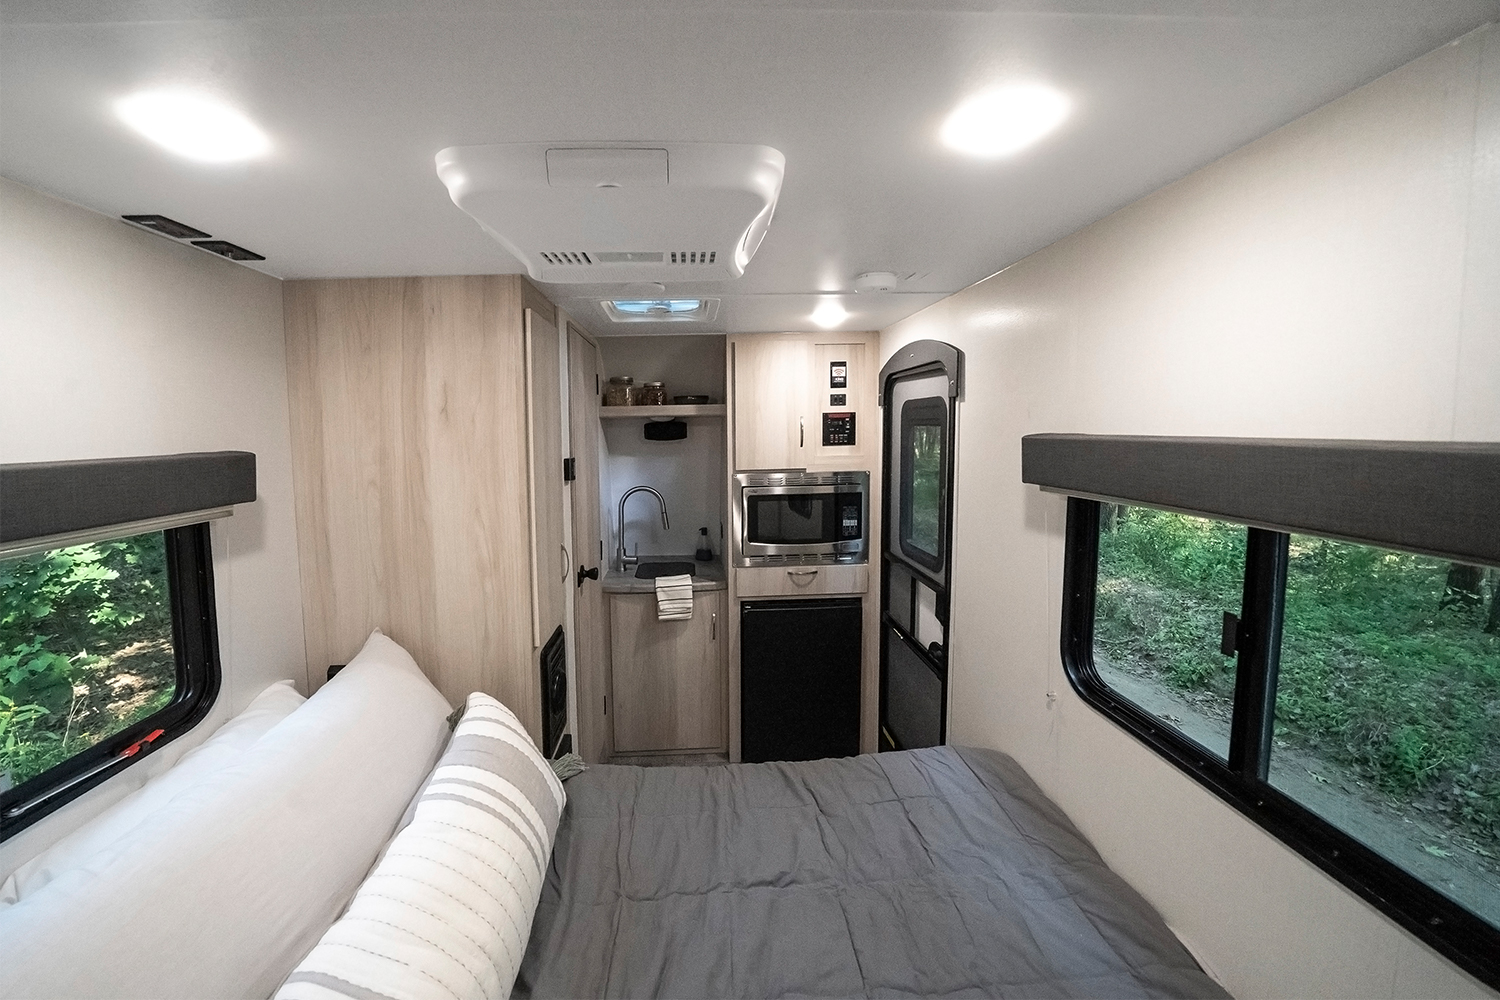 The interior of the new Winnebago Hike 100 small SUV travel trailer, featuring a bed, sink, microwave, refrigerator and wet tub